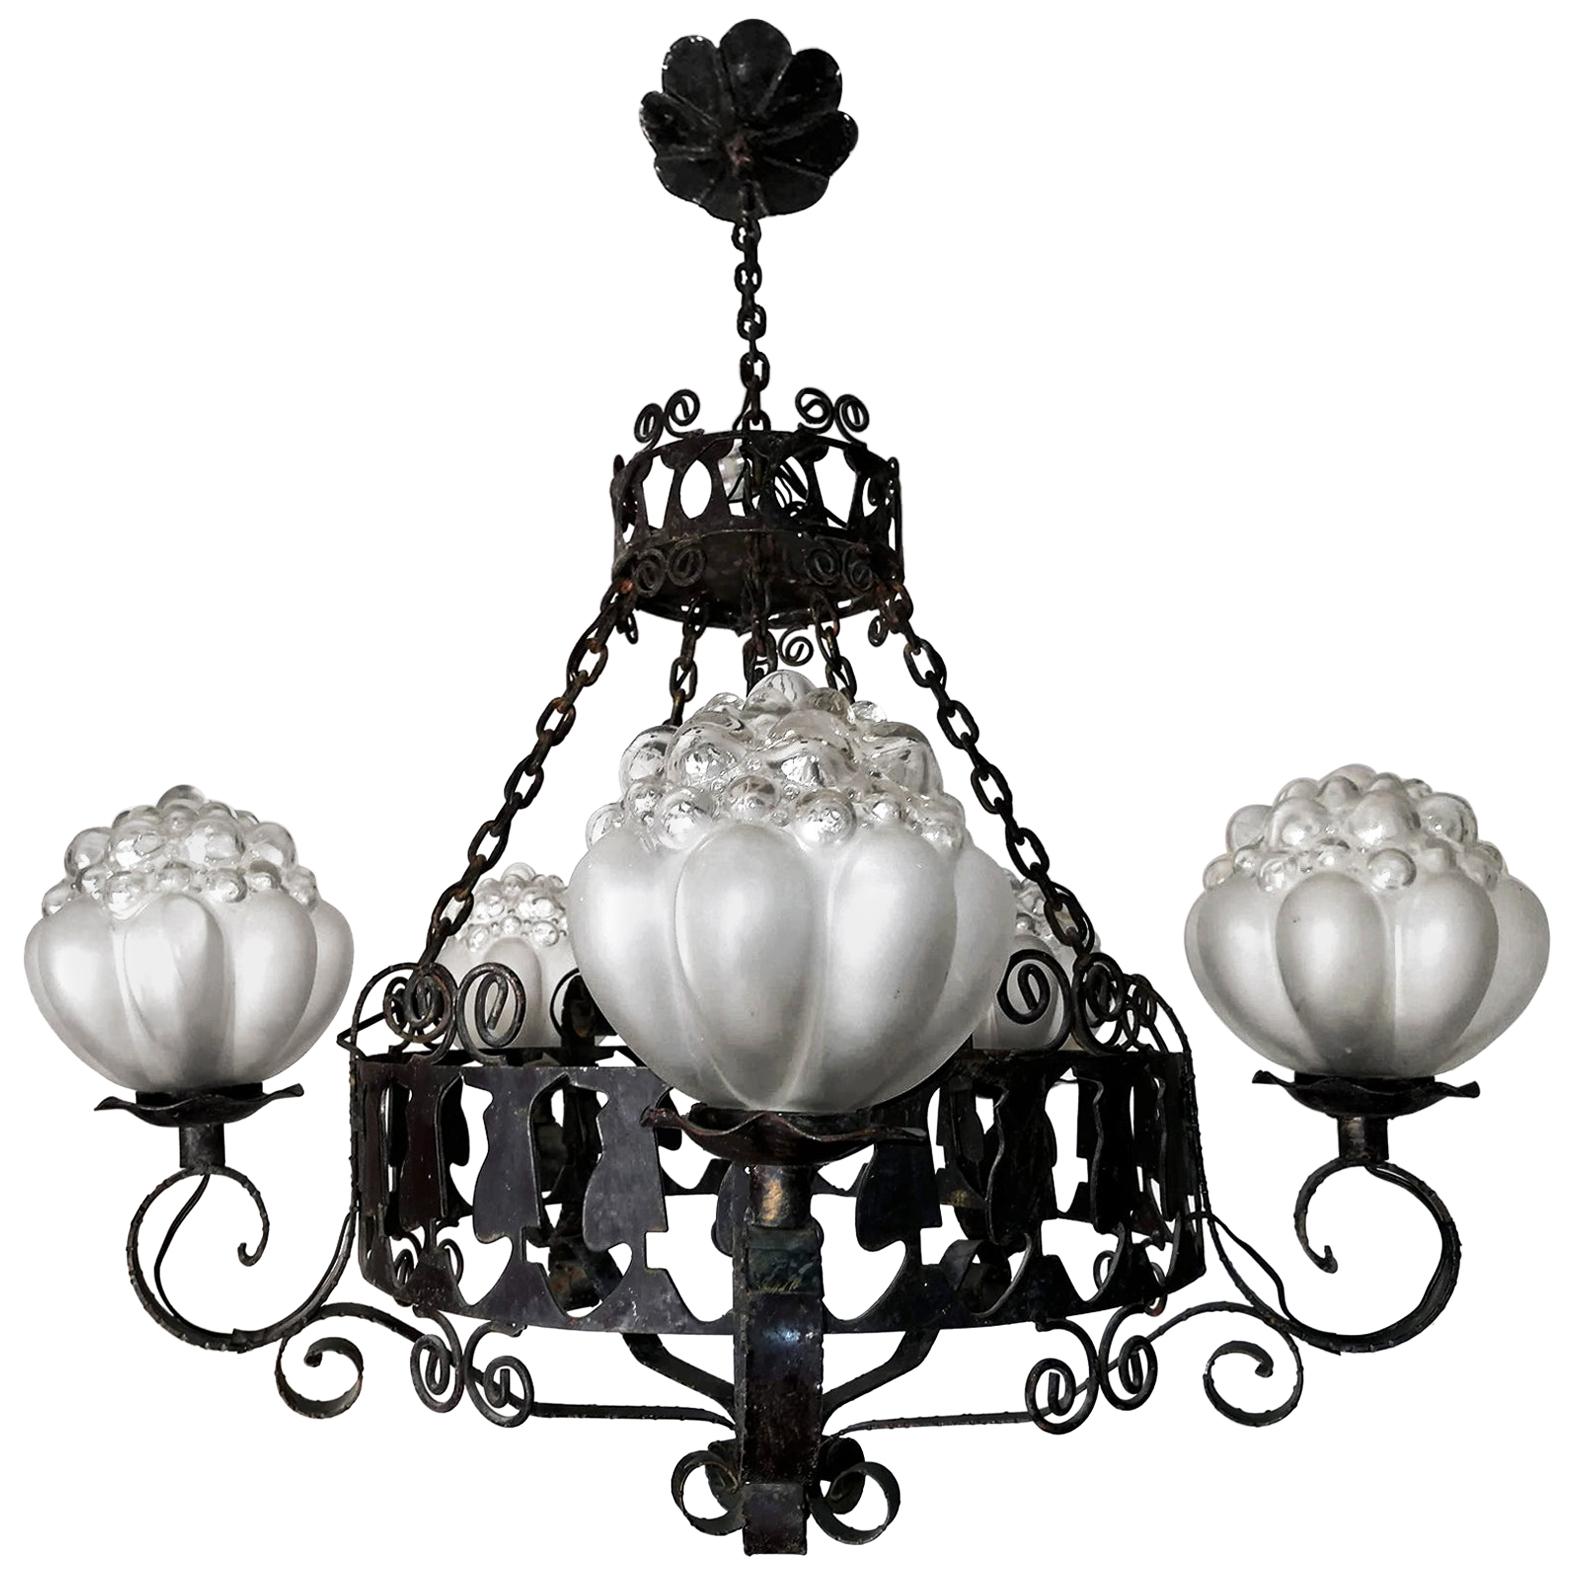 Rare Italian Murano Bubble Art Glass Hand Forged Wrought Iron Hanging Chandelier